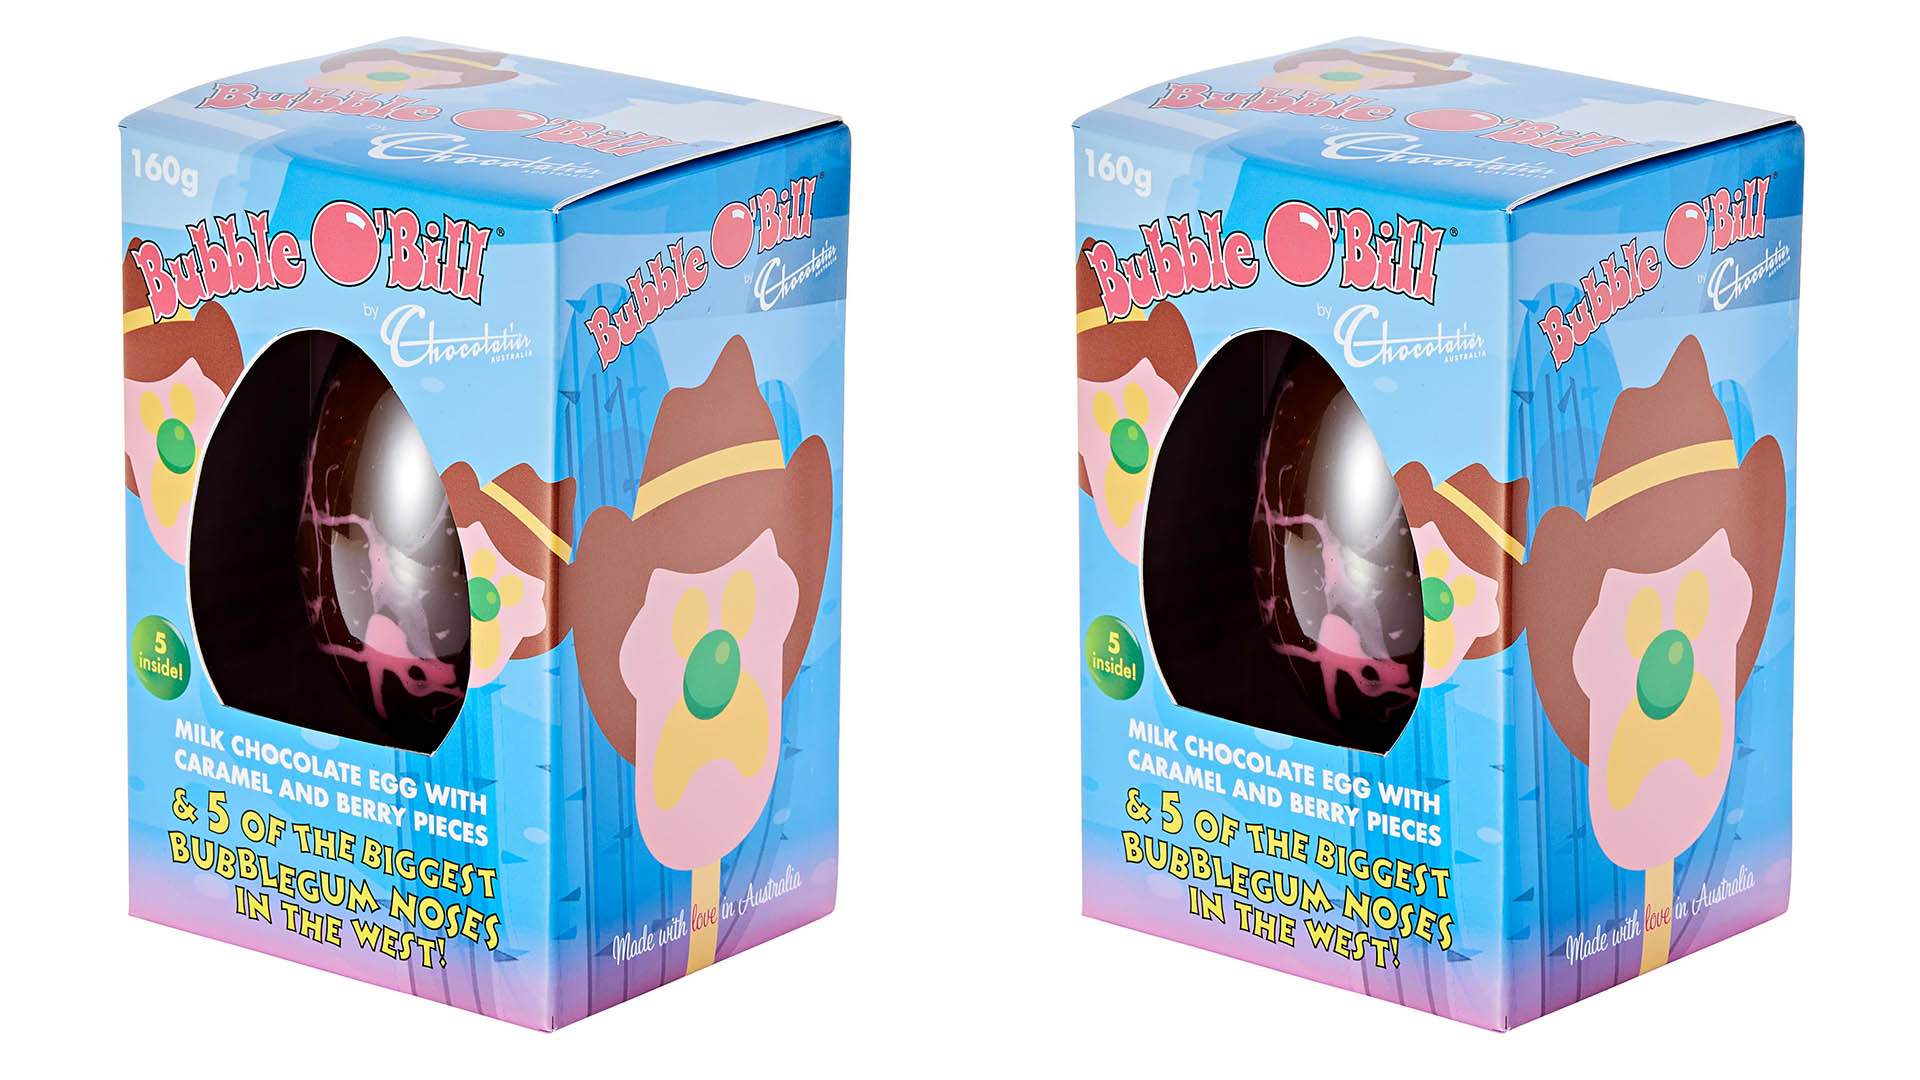 Bubble O'Bill Easter Eggs Are About to Hit Australian Supermarkets — Complete with Bubblegum Noses